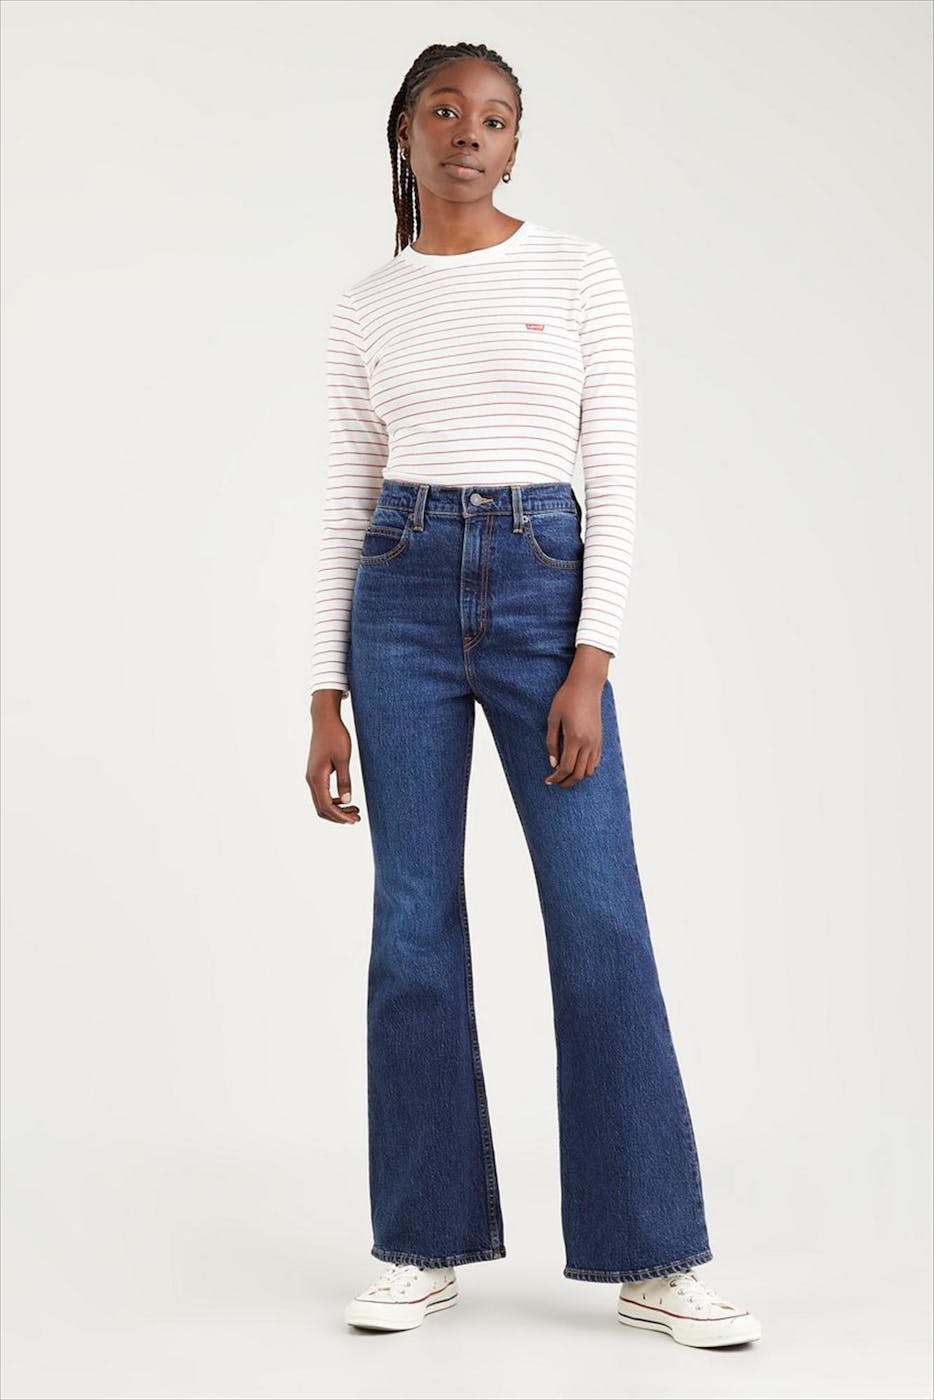 Levi's - Donkerblauwe 70s High Flare jeans